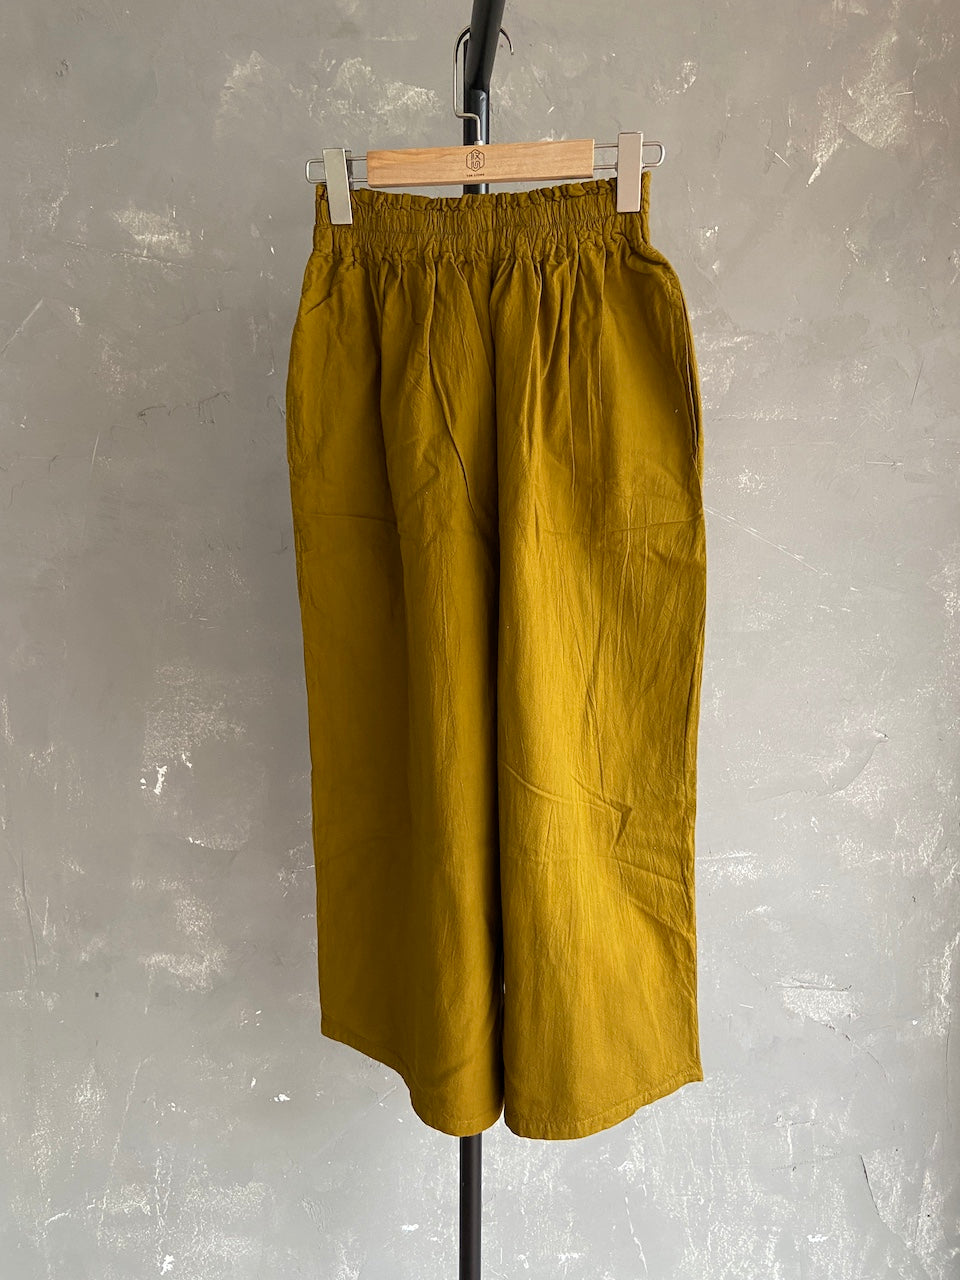 Hand Dyed Farmer's Pants in Camel